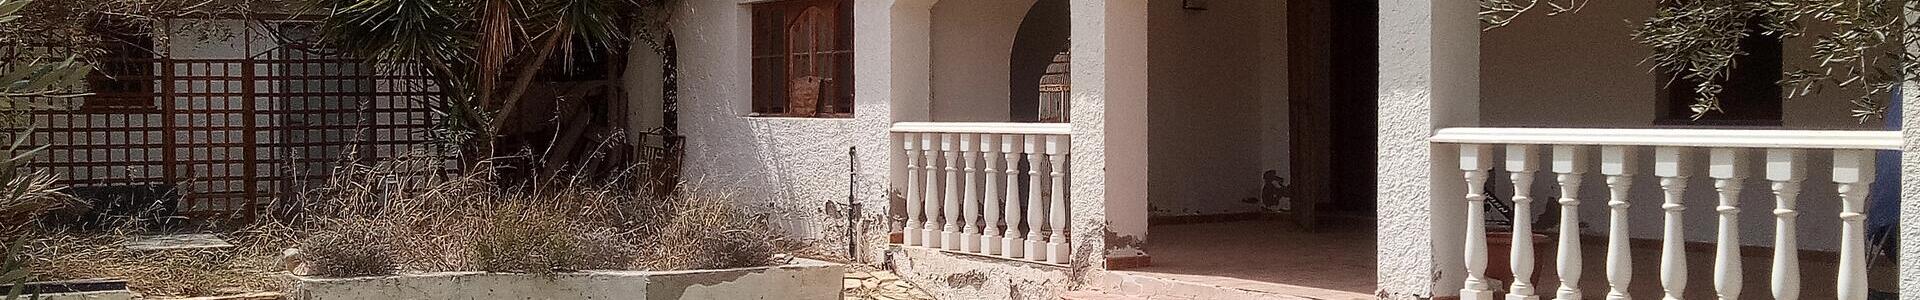 130-1409: 5 Bedroom Cortijo: Traditional Cottage for Sale